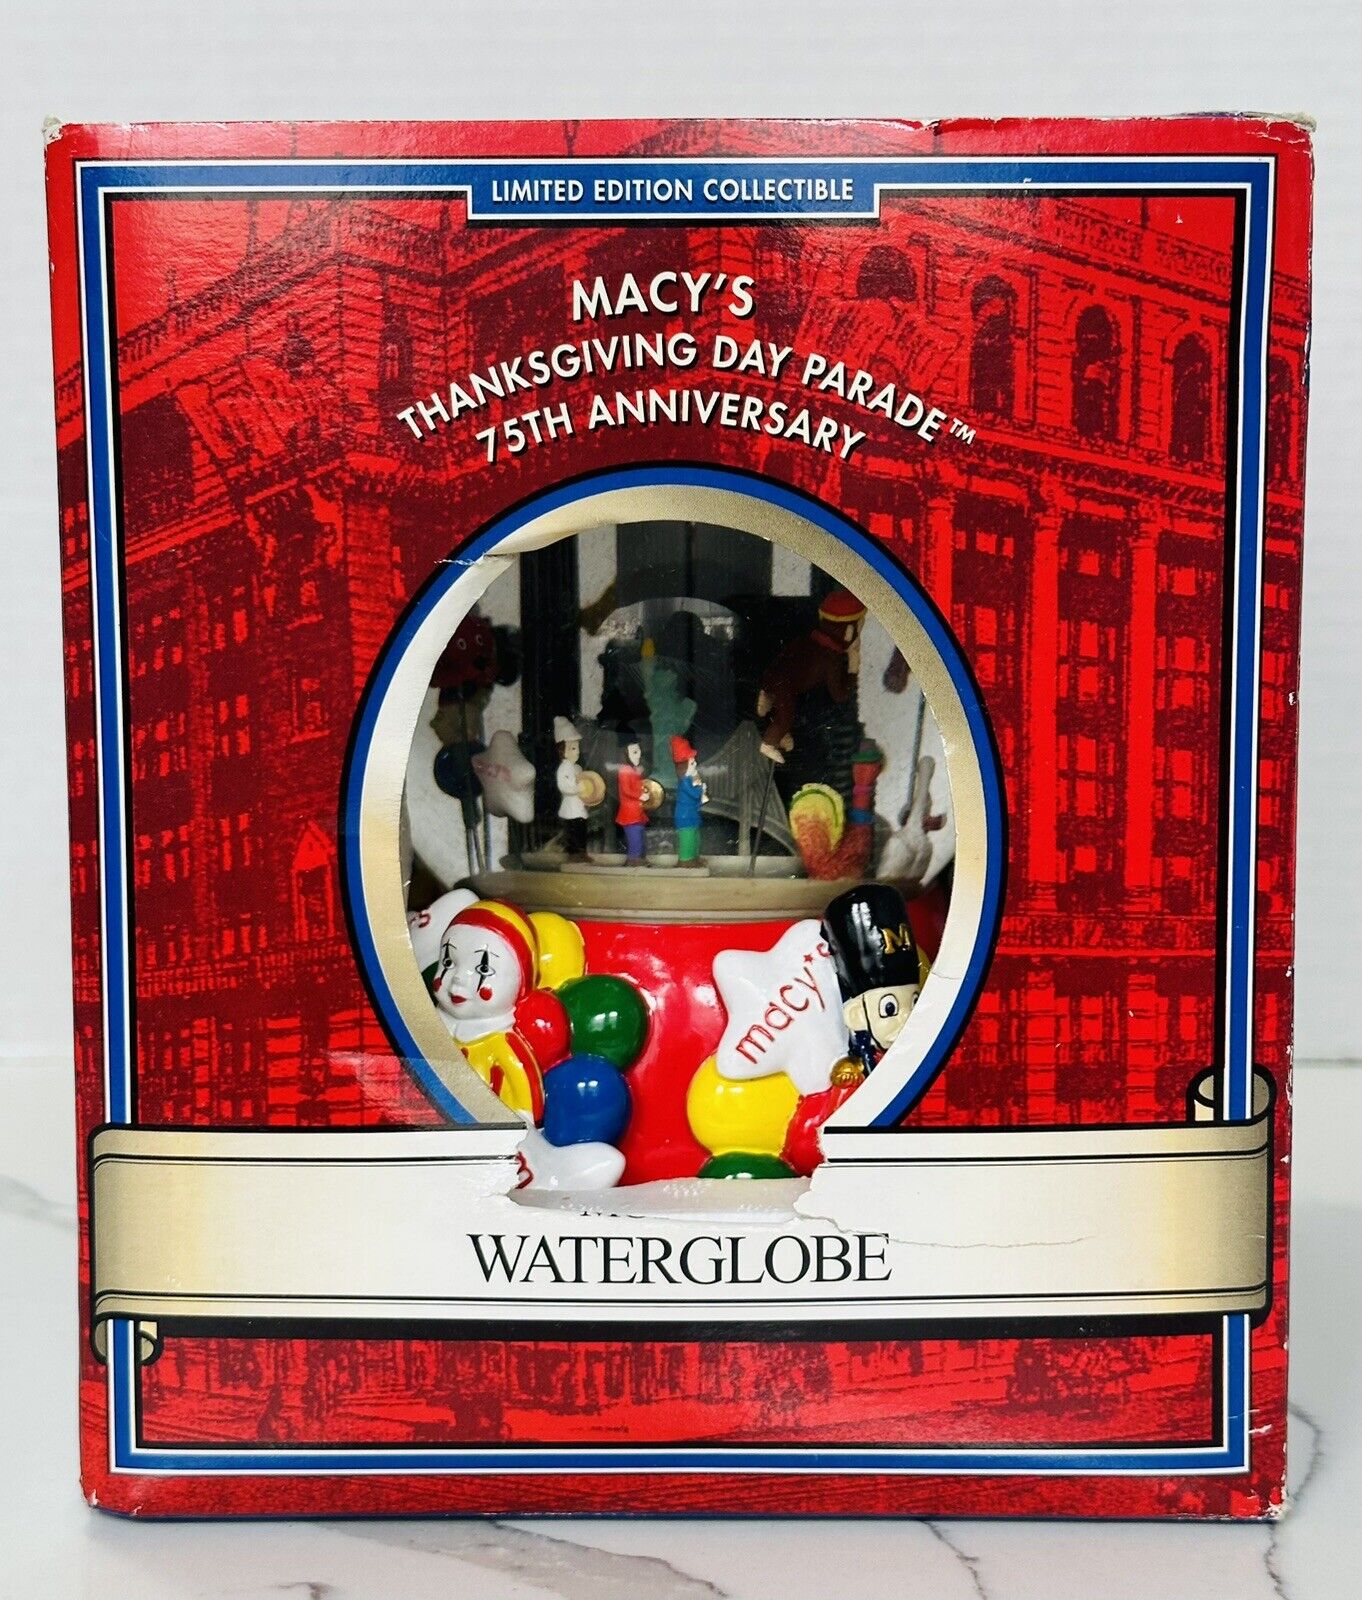 2001 Macys Thanksgiving's Day Parade Musical Globe Twin Towers 75th Anniversary